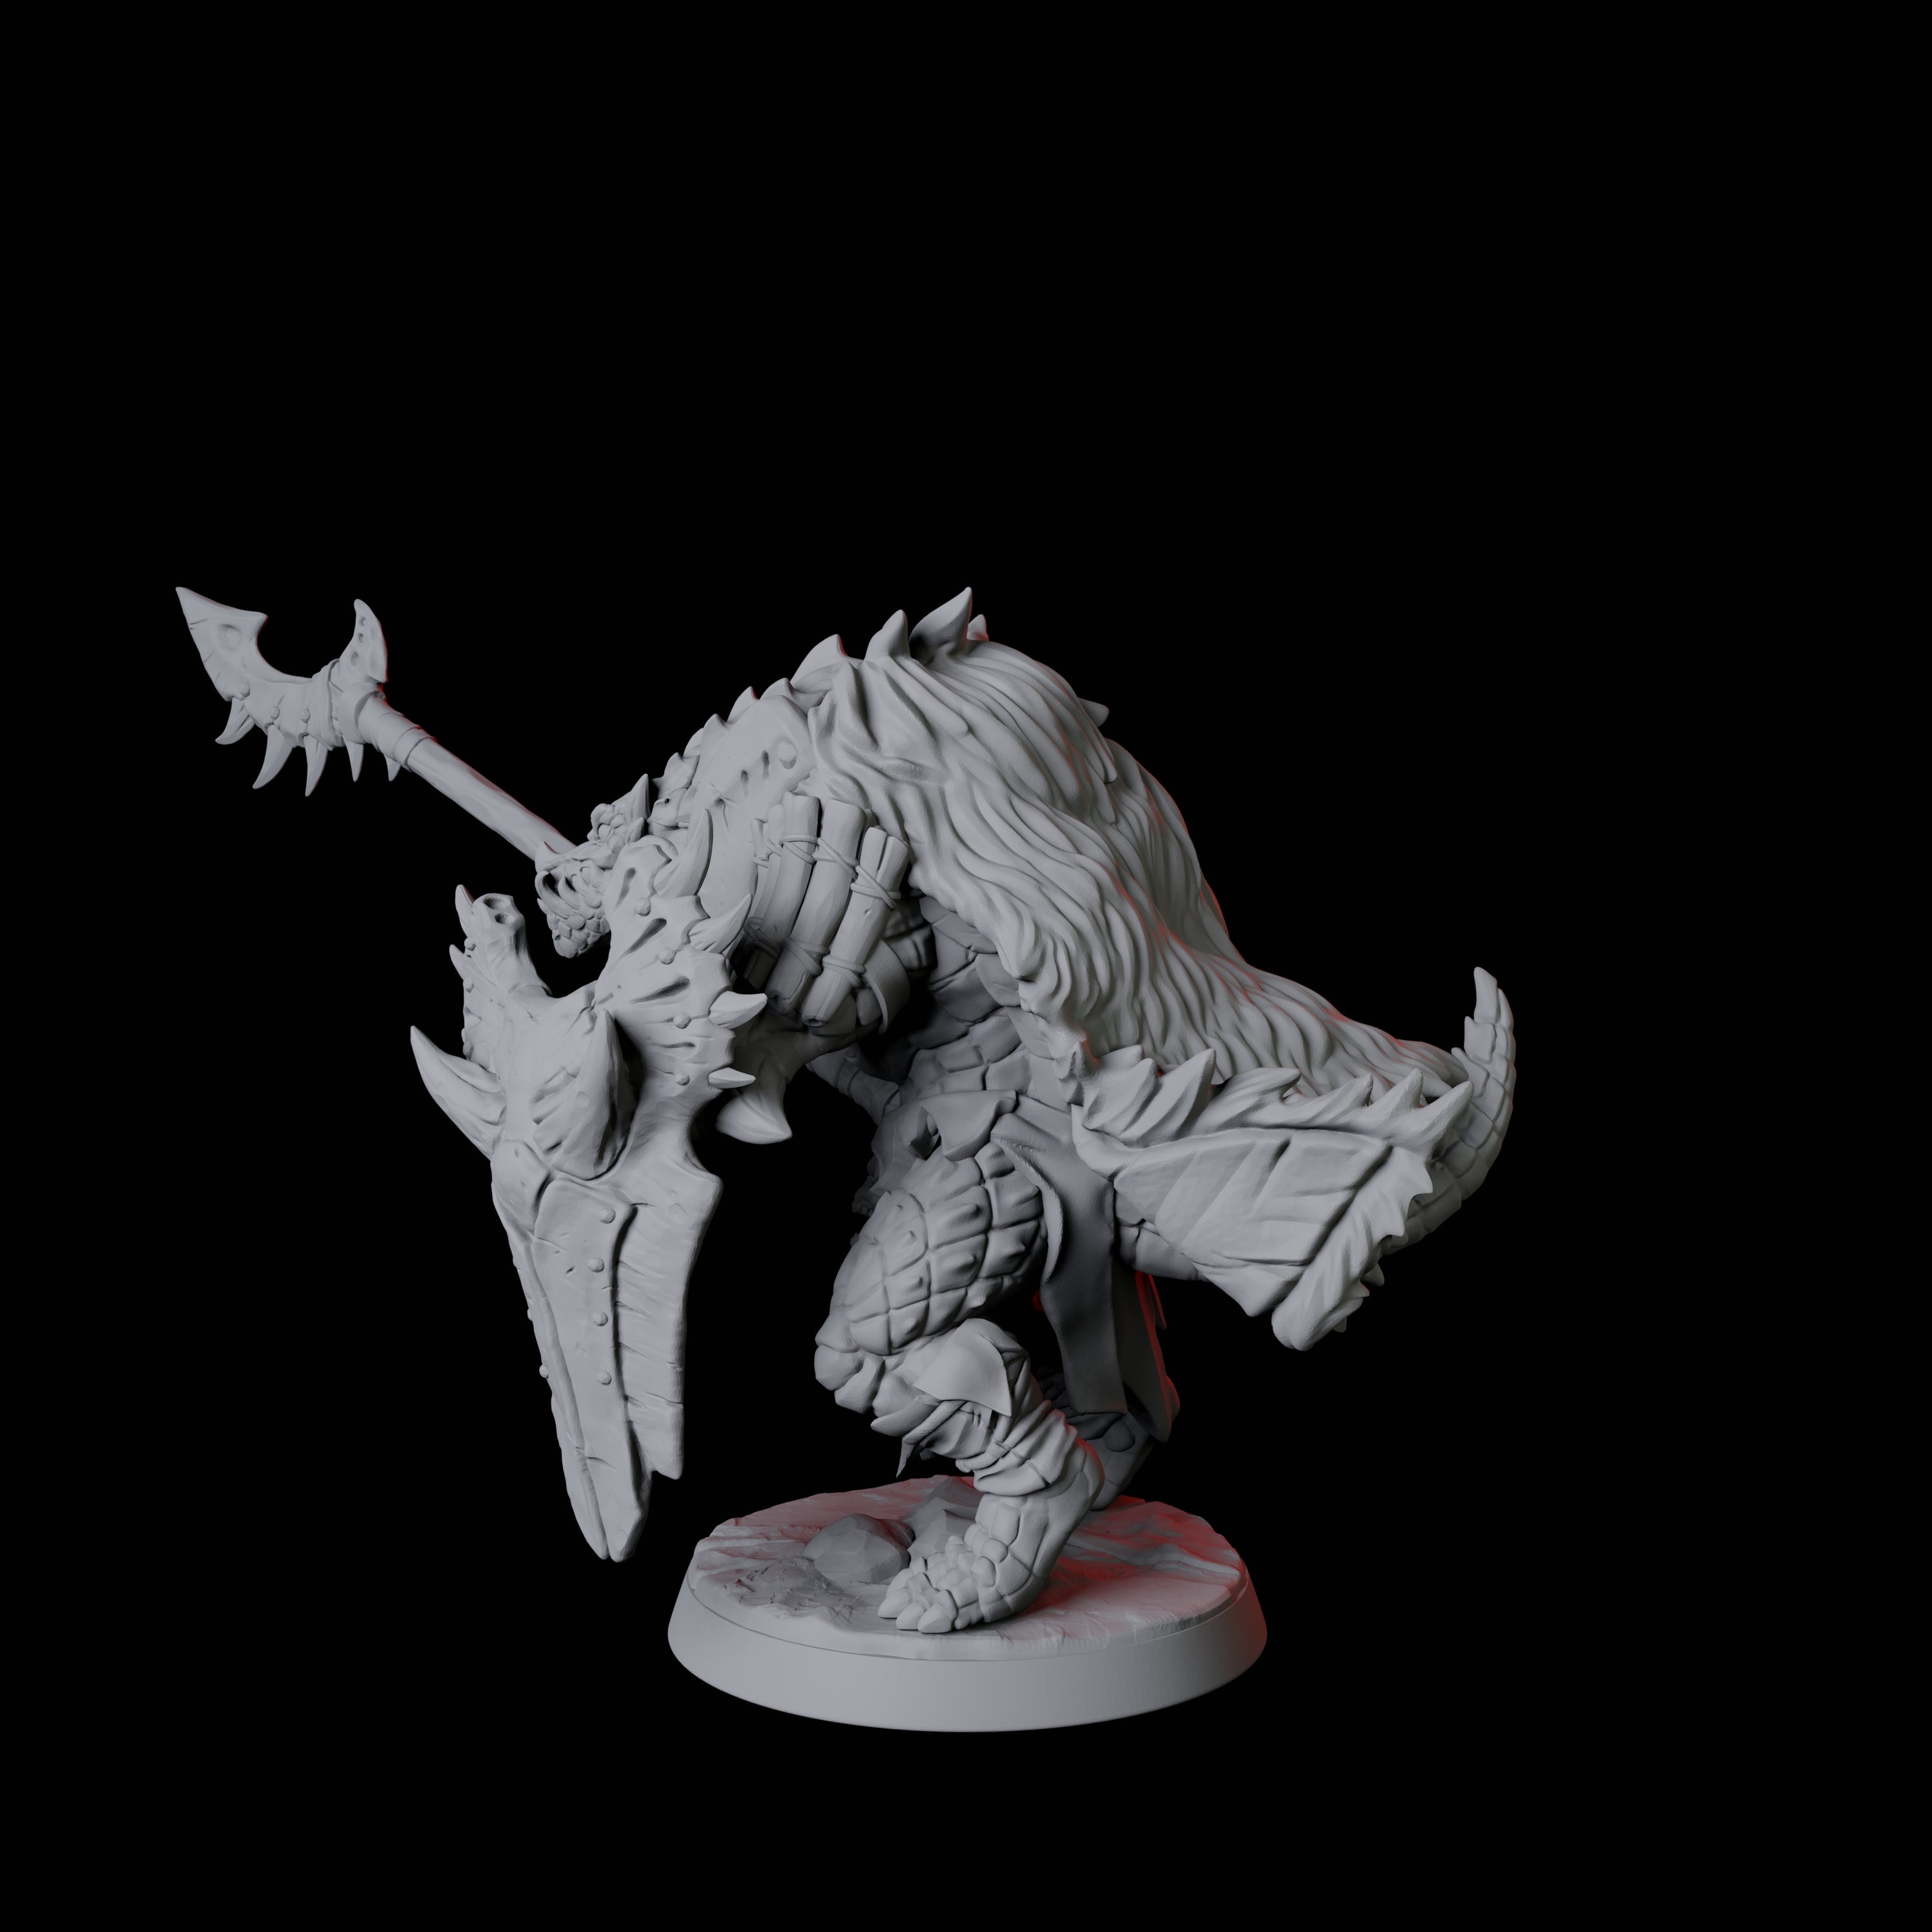 Powerful Frost Lizardfolk F Miniature for Dungeons and Dragons, Pathfinder or other TTRPGs